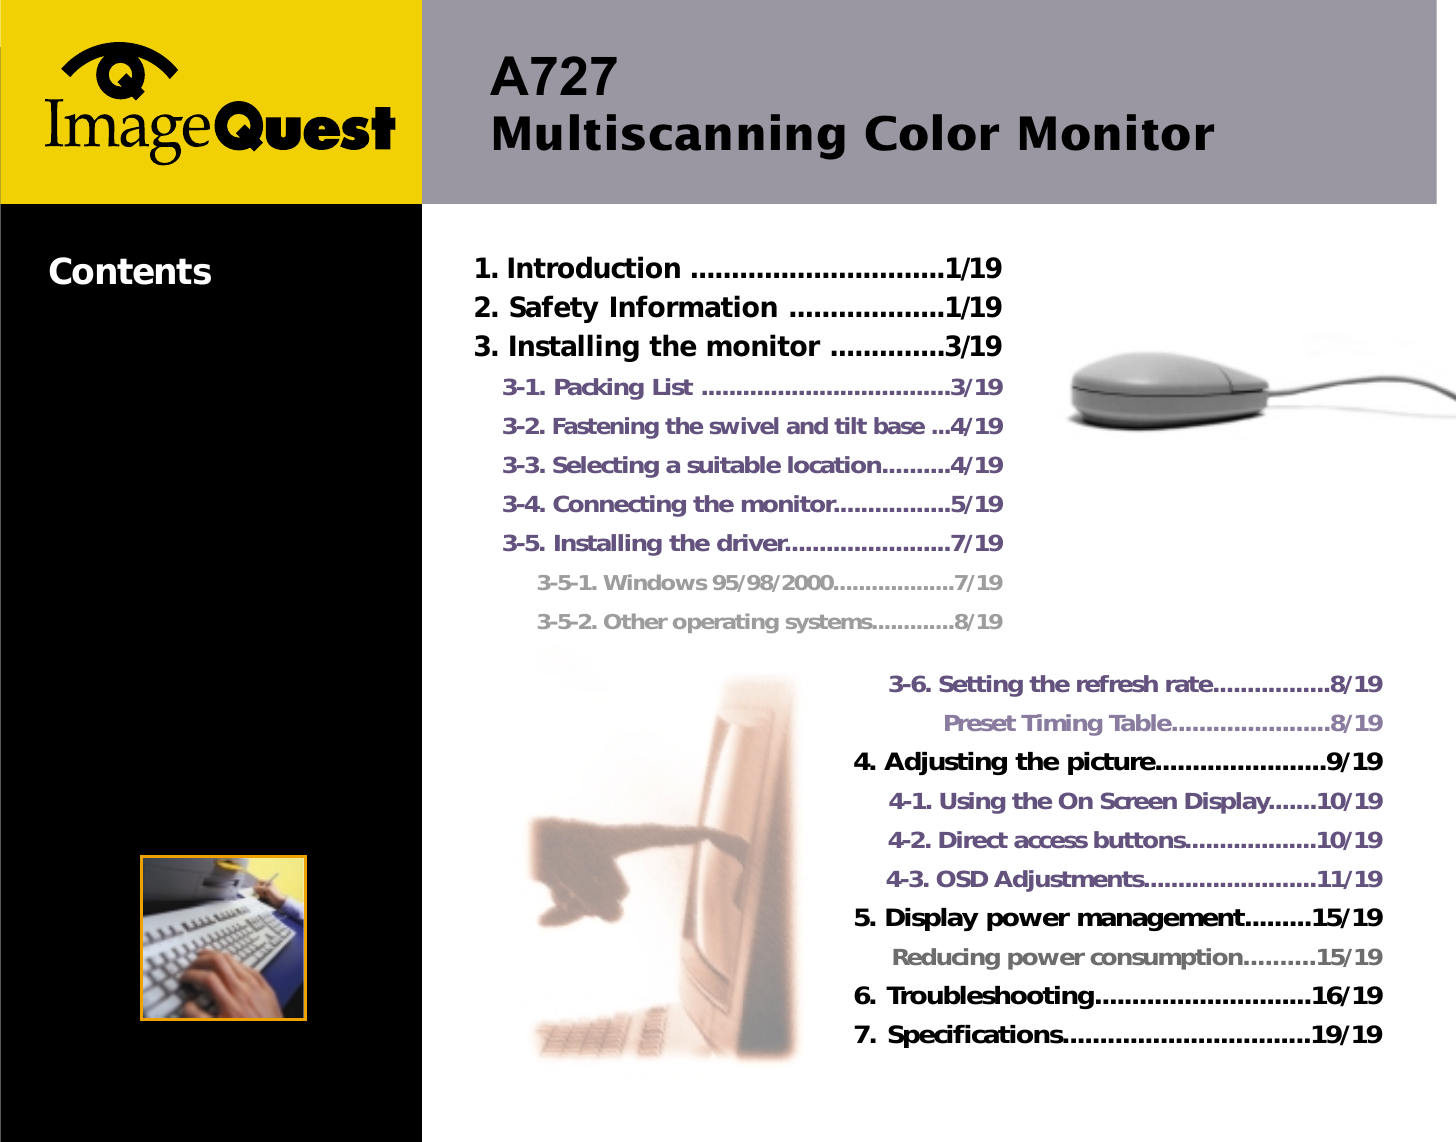 A727 Multiscanning Color MonitorContents3-6. Setting the refresh rate.................8/19Preset Timing Table.......................8/194. Adjusting the picture.......................9/194-1. Using the On Screen Display.......10/194-2. Direct access buttons...................10/194-3. OSD Adjustments.........................11/195. Display power management.........15/19Reducing power consumption..........15/196. Troubleshooting.............................16/197. Specifications.................................19/191. Introduction ...............................1/192. Safety Information ...................1/193. Installing the monitor ..............3/193-1. Packing List ....................................3/193-2. Fastening the swivel and tilt base ...4/193-3. Selecting a suitable location..........4/193-4. Connecting the monitor.................5/193-5. Installing the driver........................7/193-5-1. Windows 95/98/2000...................7/193-5-2. Other operating systems.............8/19